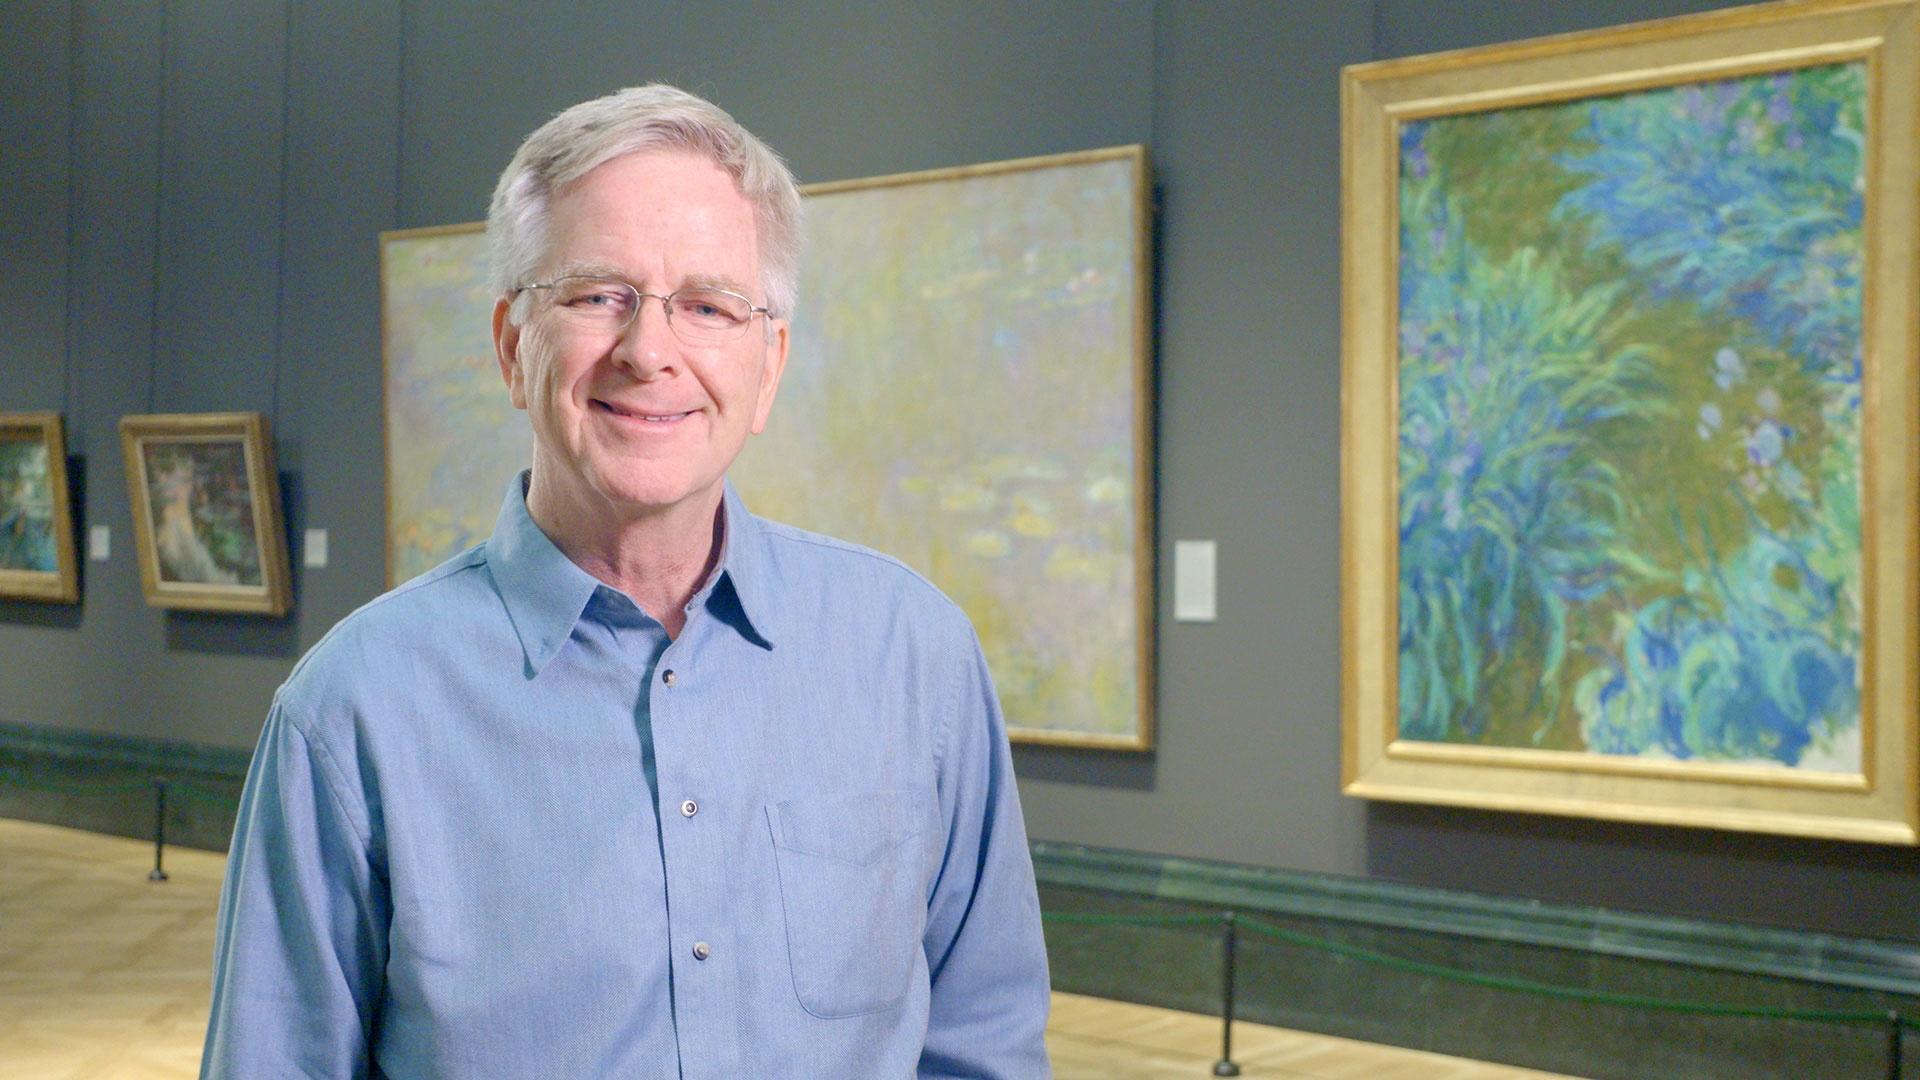 Rick Steves' Europe: Art of the Impressionists and Beyond